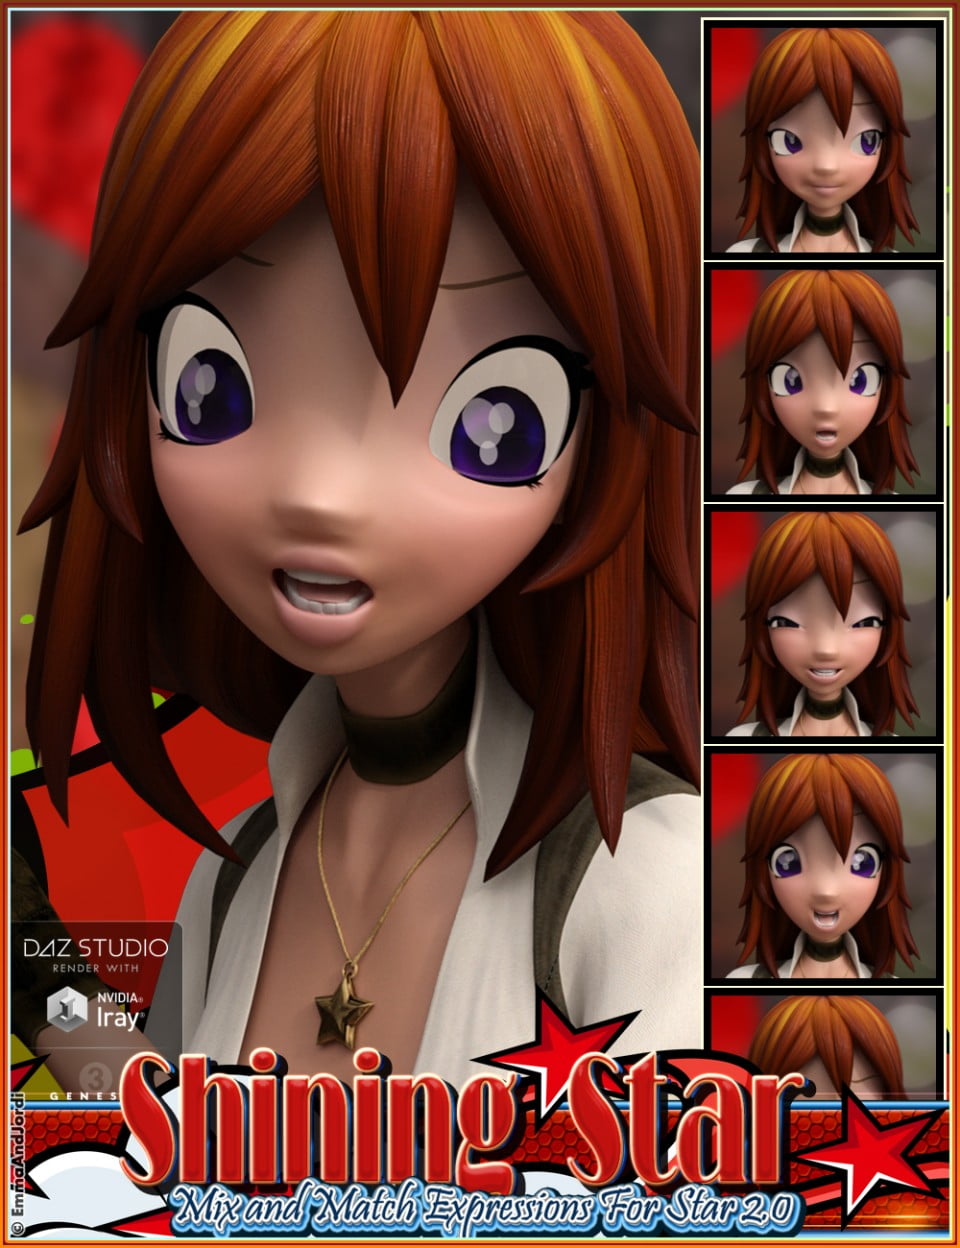 00-main-shining-star-mix-and-match-expressions-for-star-20-daz3d